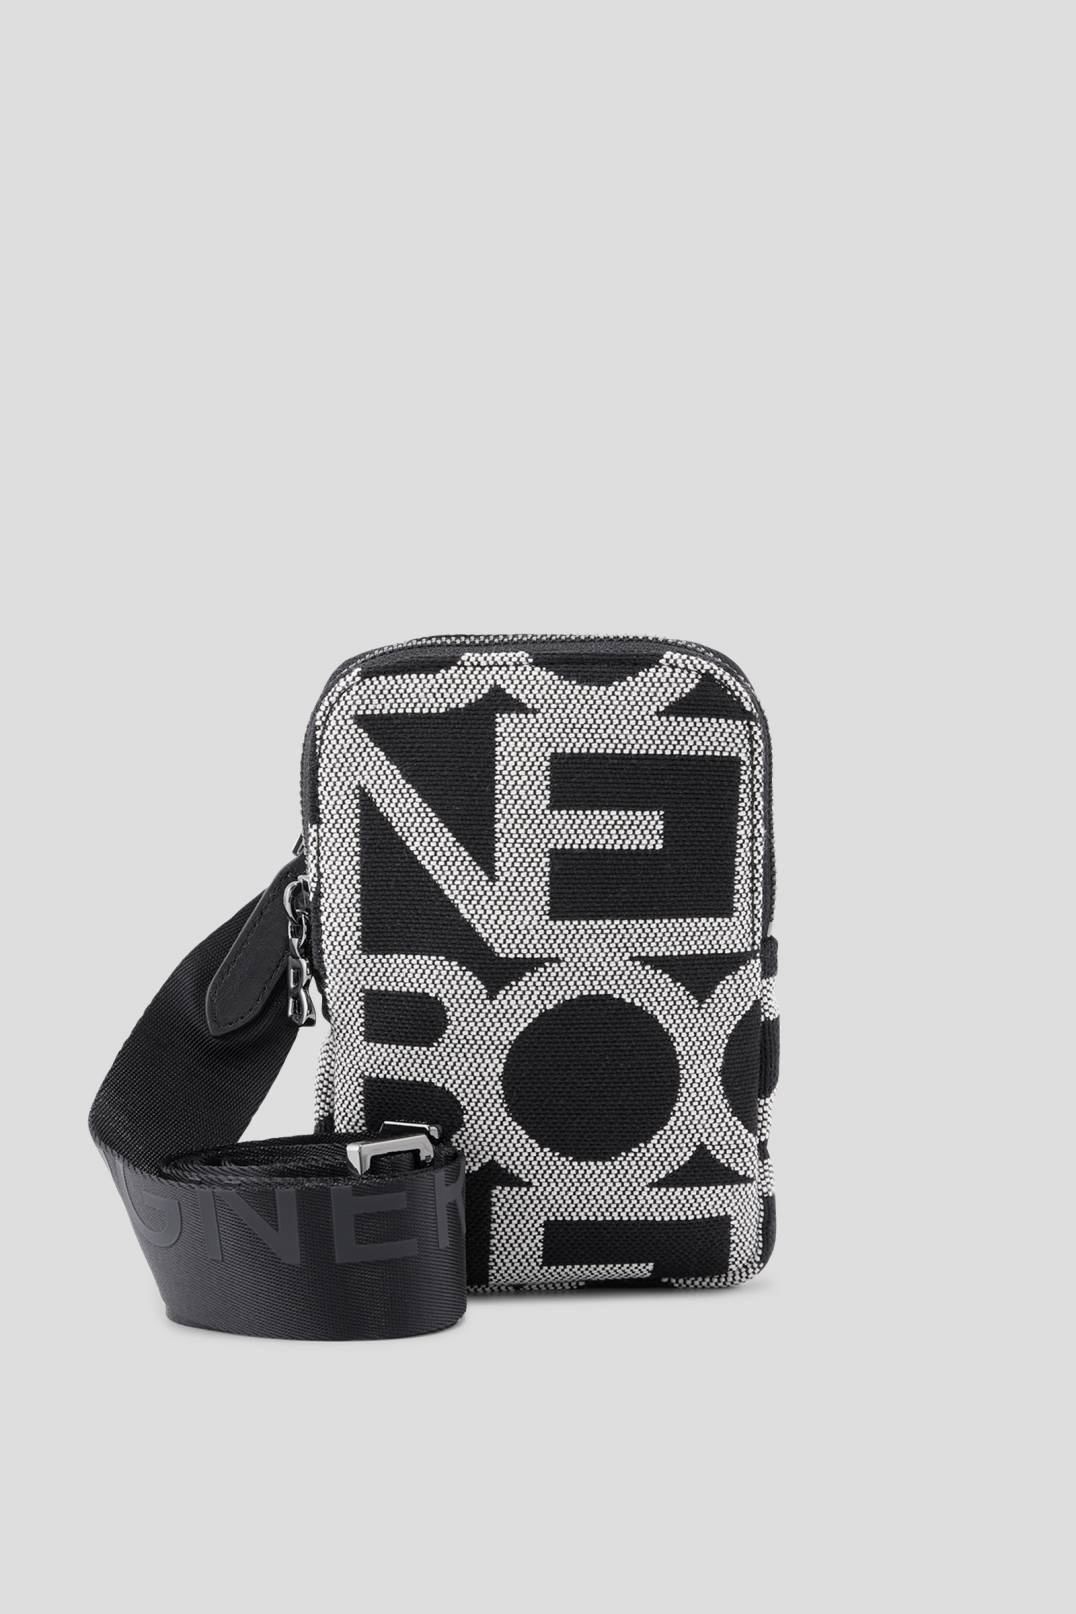 PANY JOHANNA SMARTPHONE POUCH IN BLACK/WHITE - 1